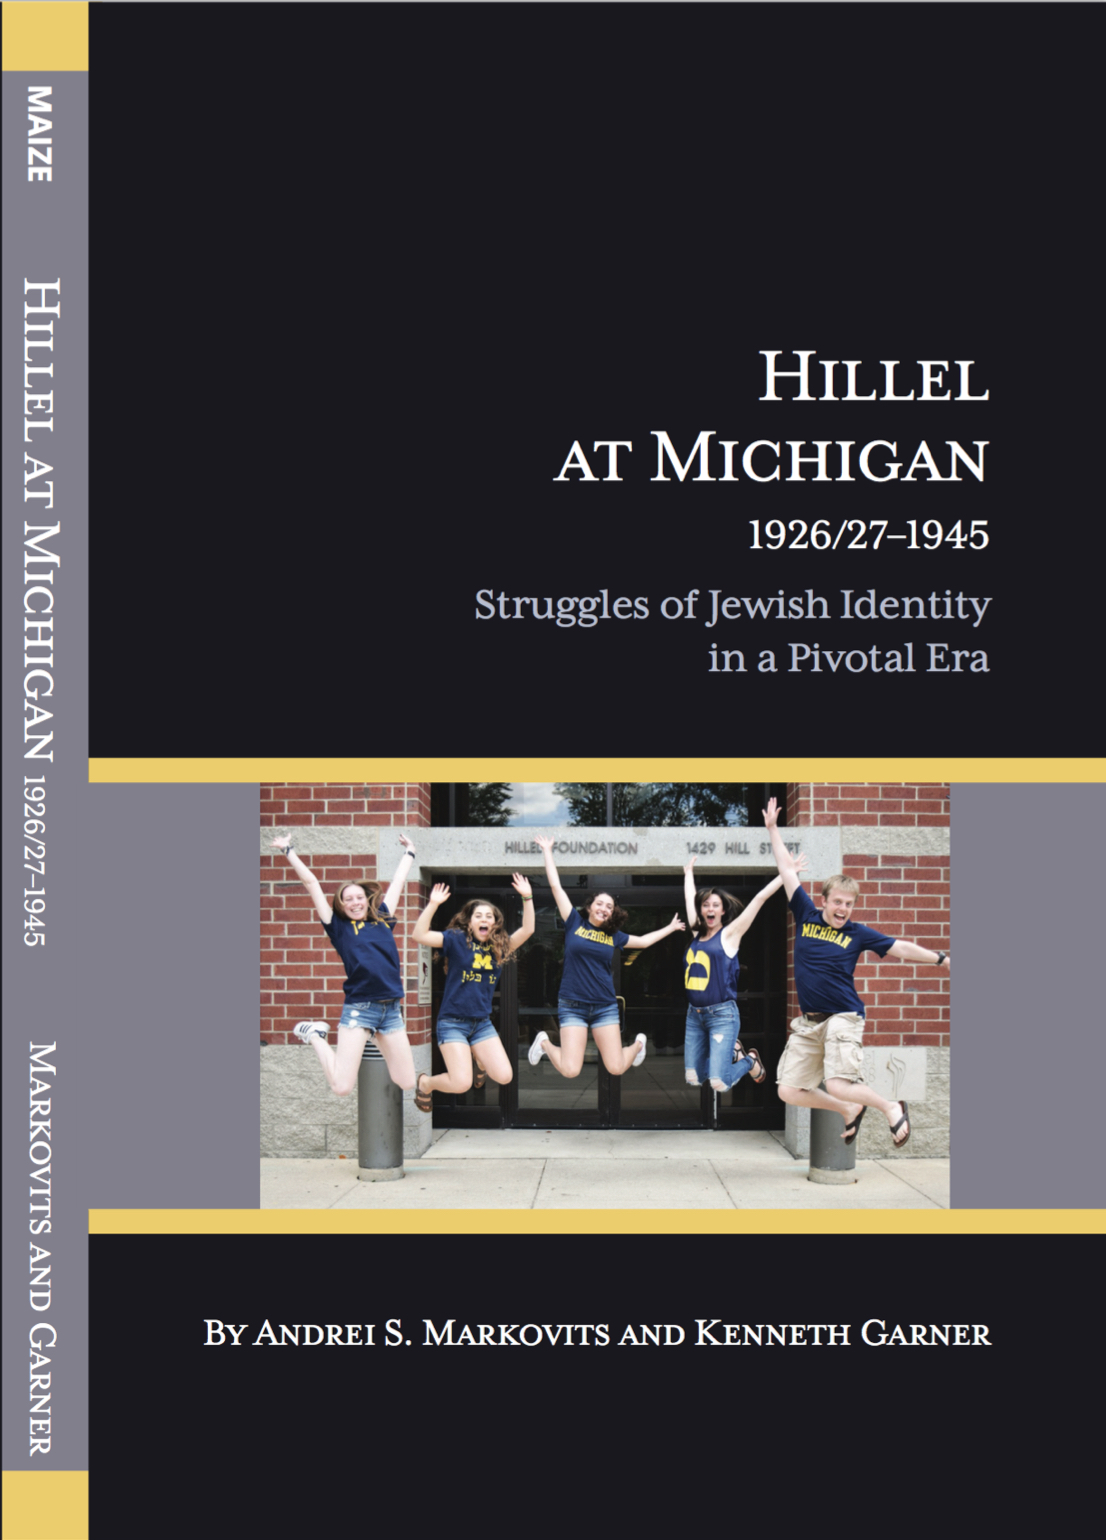 HillelAtMichiganFront